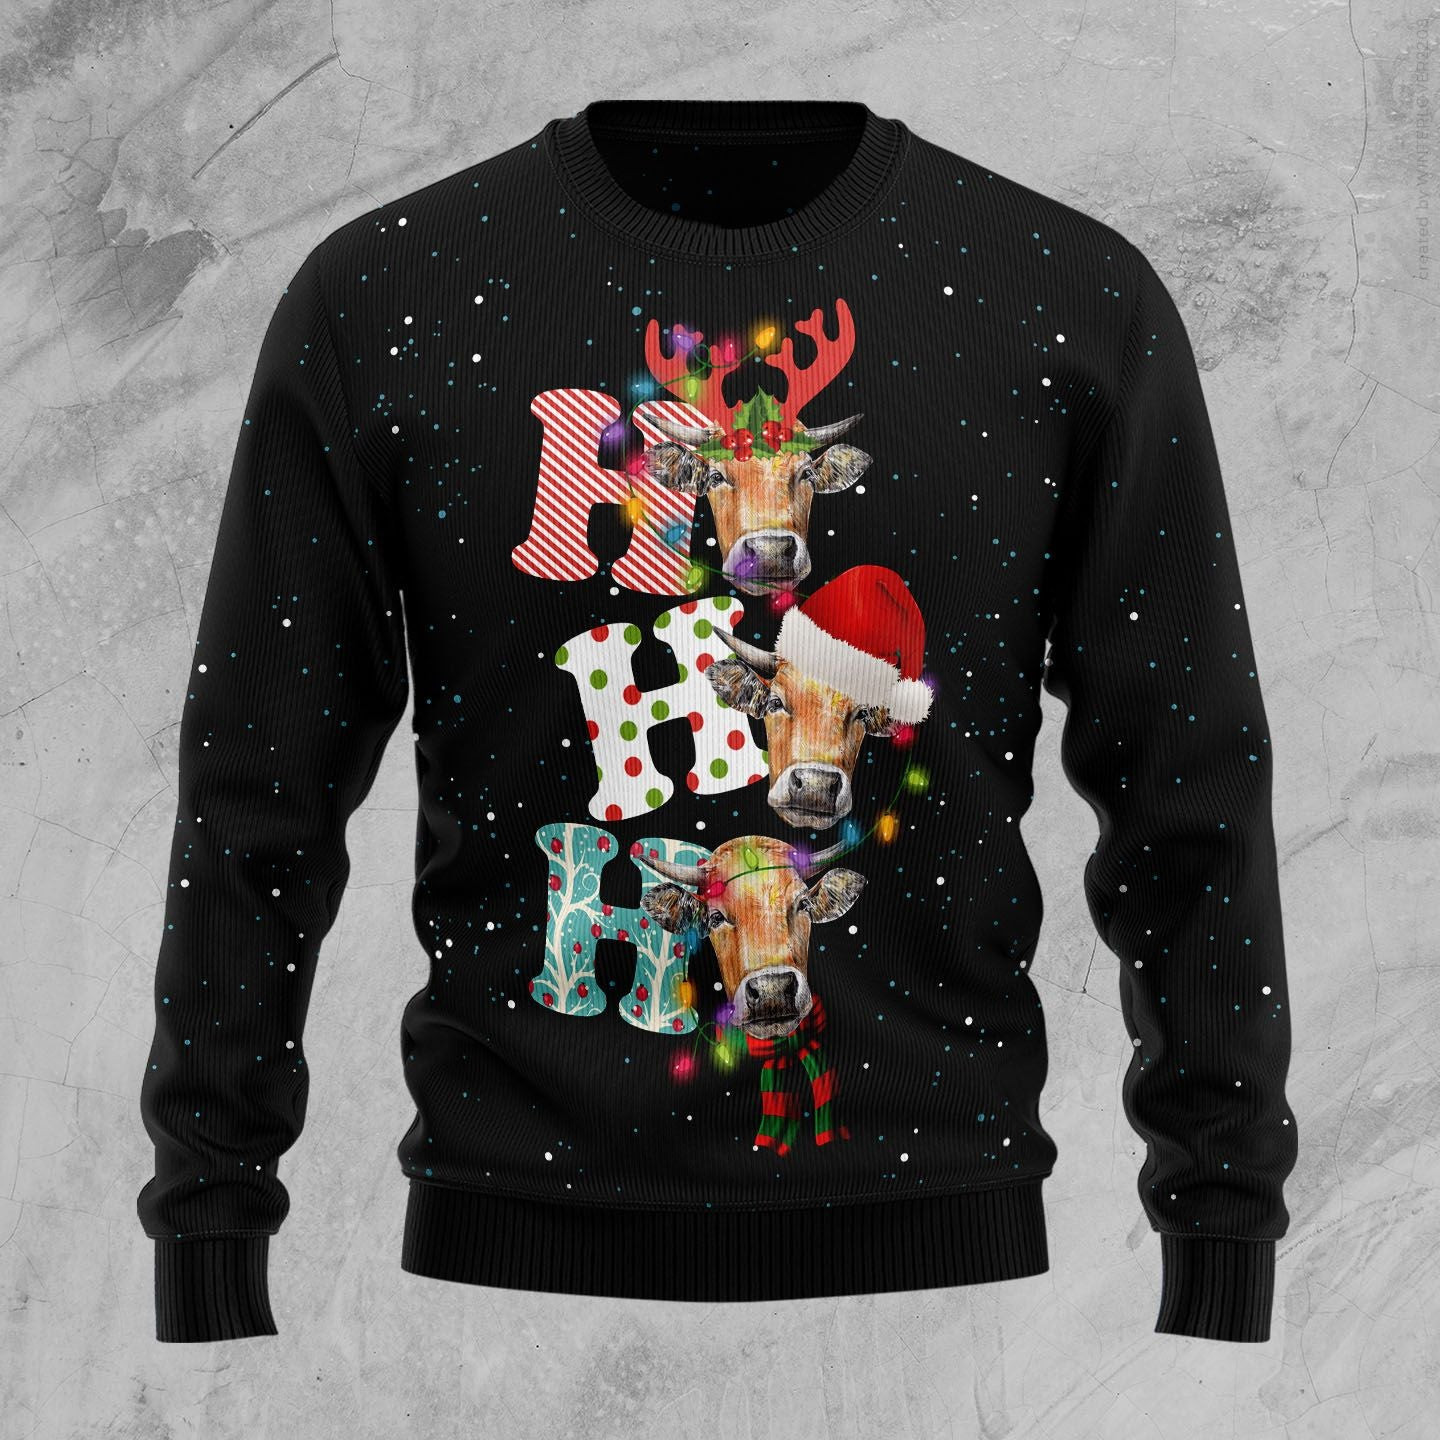 Cow Ho Ho Ho Ugly Christmas Sweater, Ugly Sweater For Men Women, Holiday Sweater